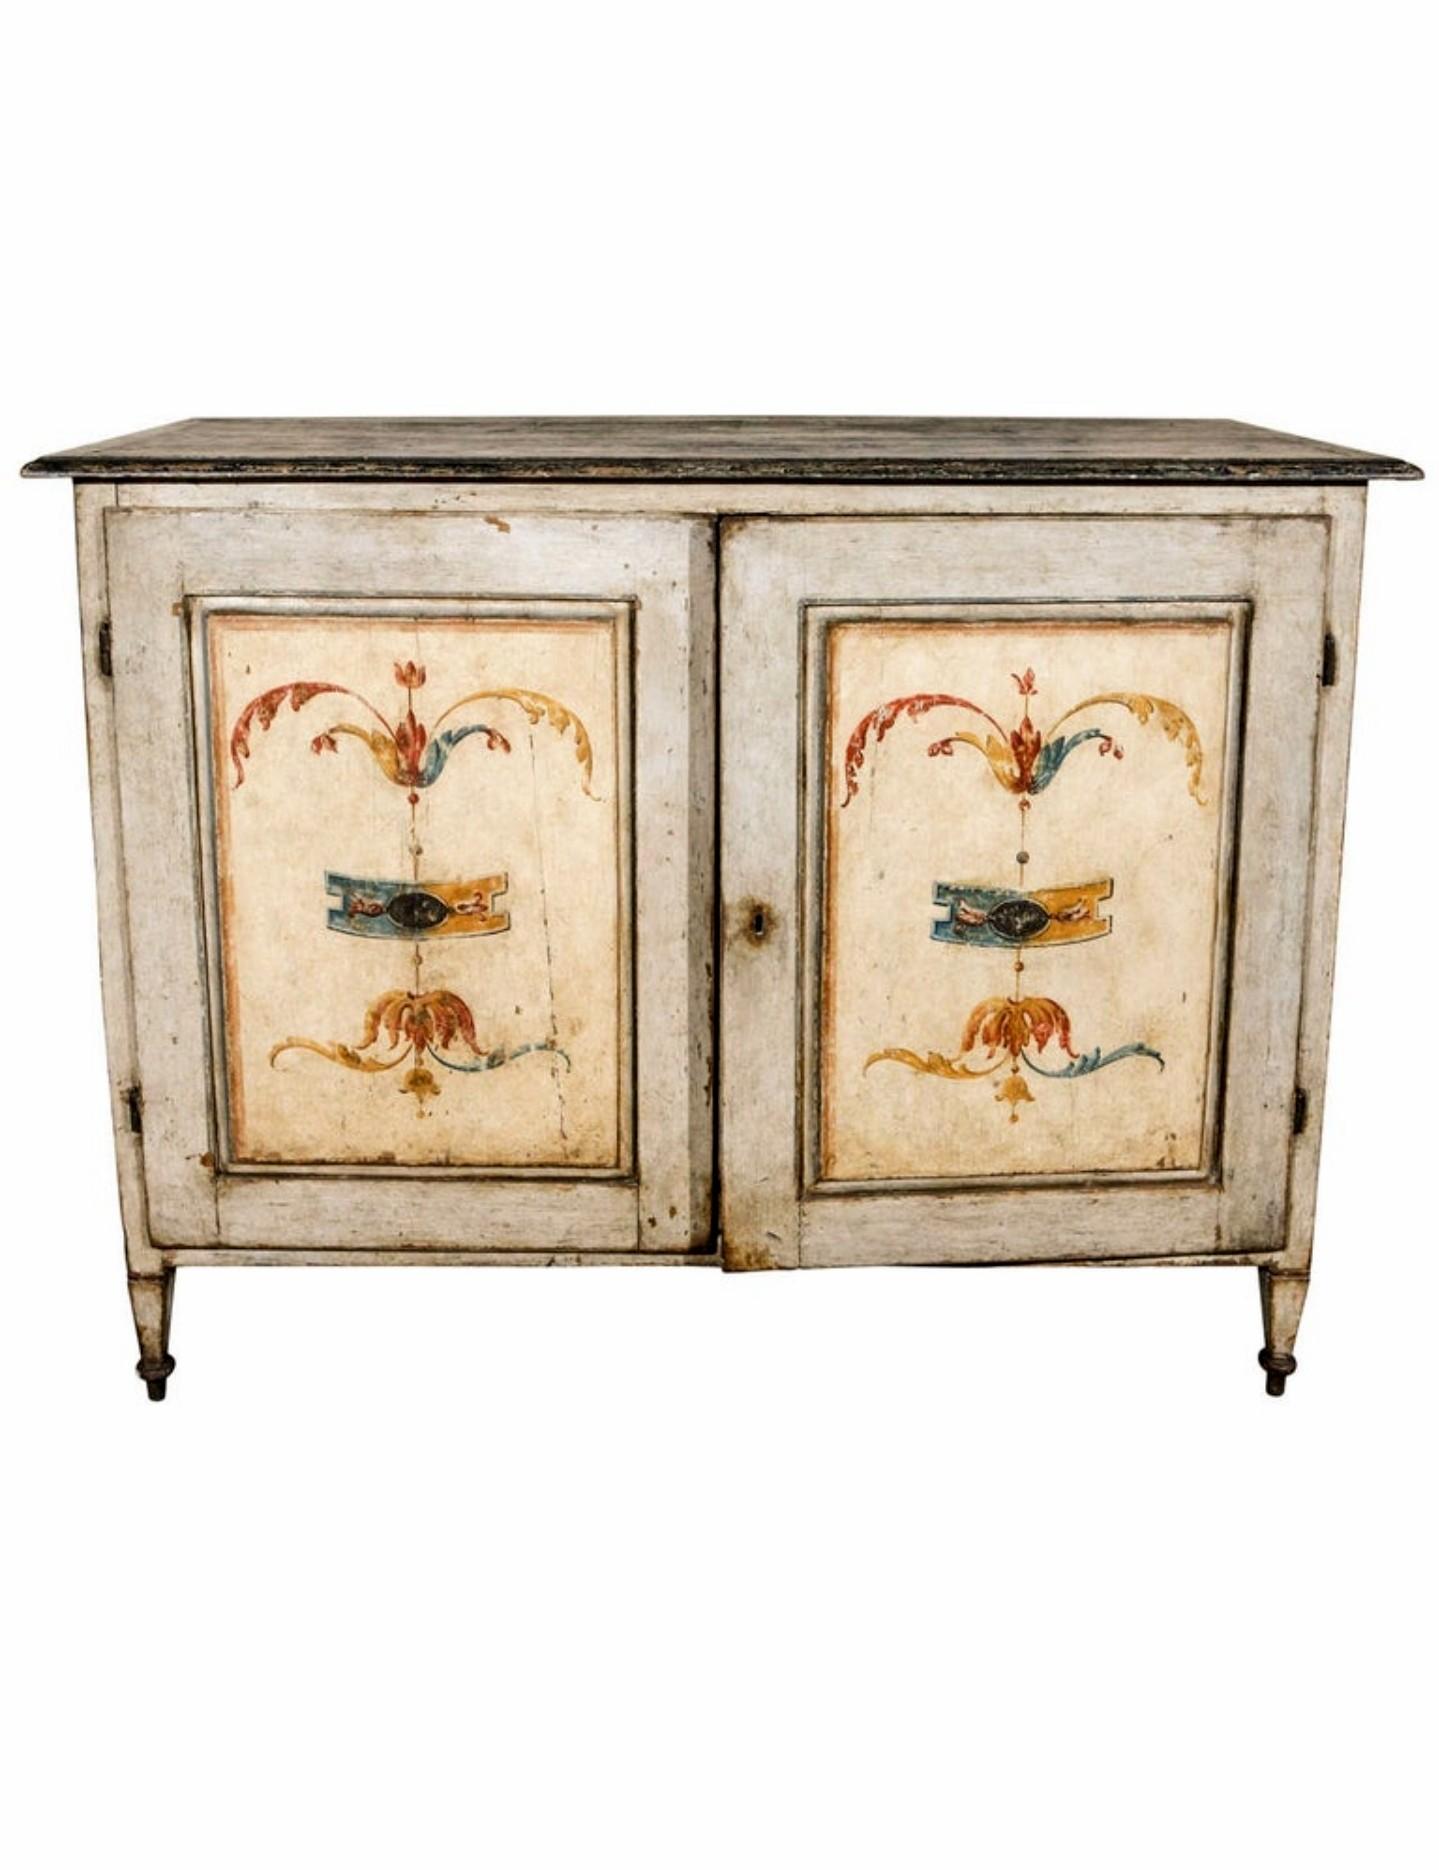 19th Century Tuscan Italian Renaissance Polychrome Painted Buffet Cupboard  For Sale 10